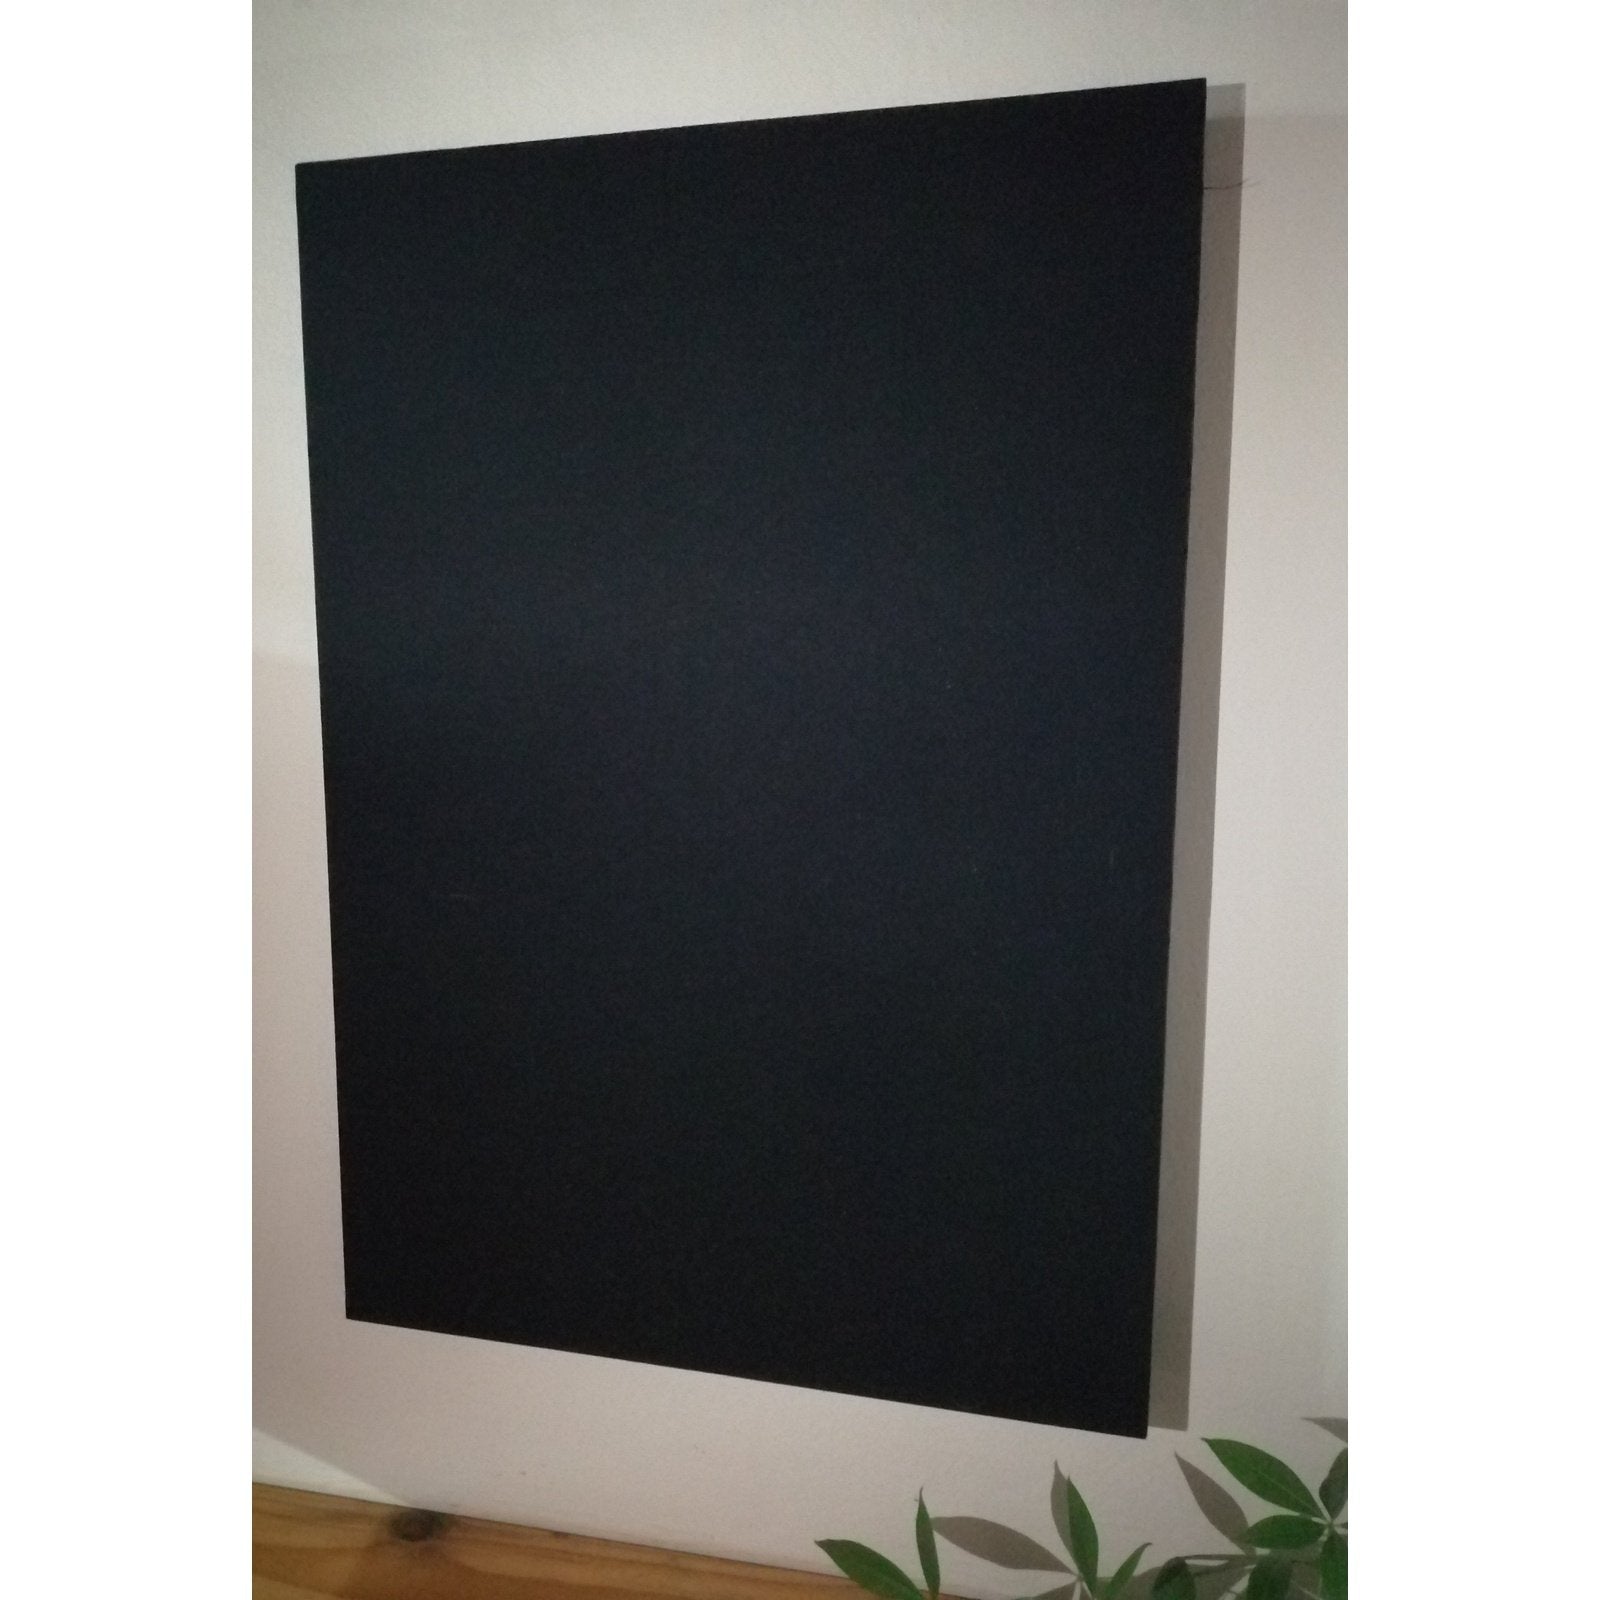 Black fabric upholstered acoustic wall panel